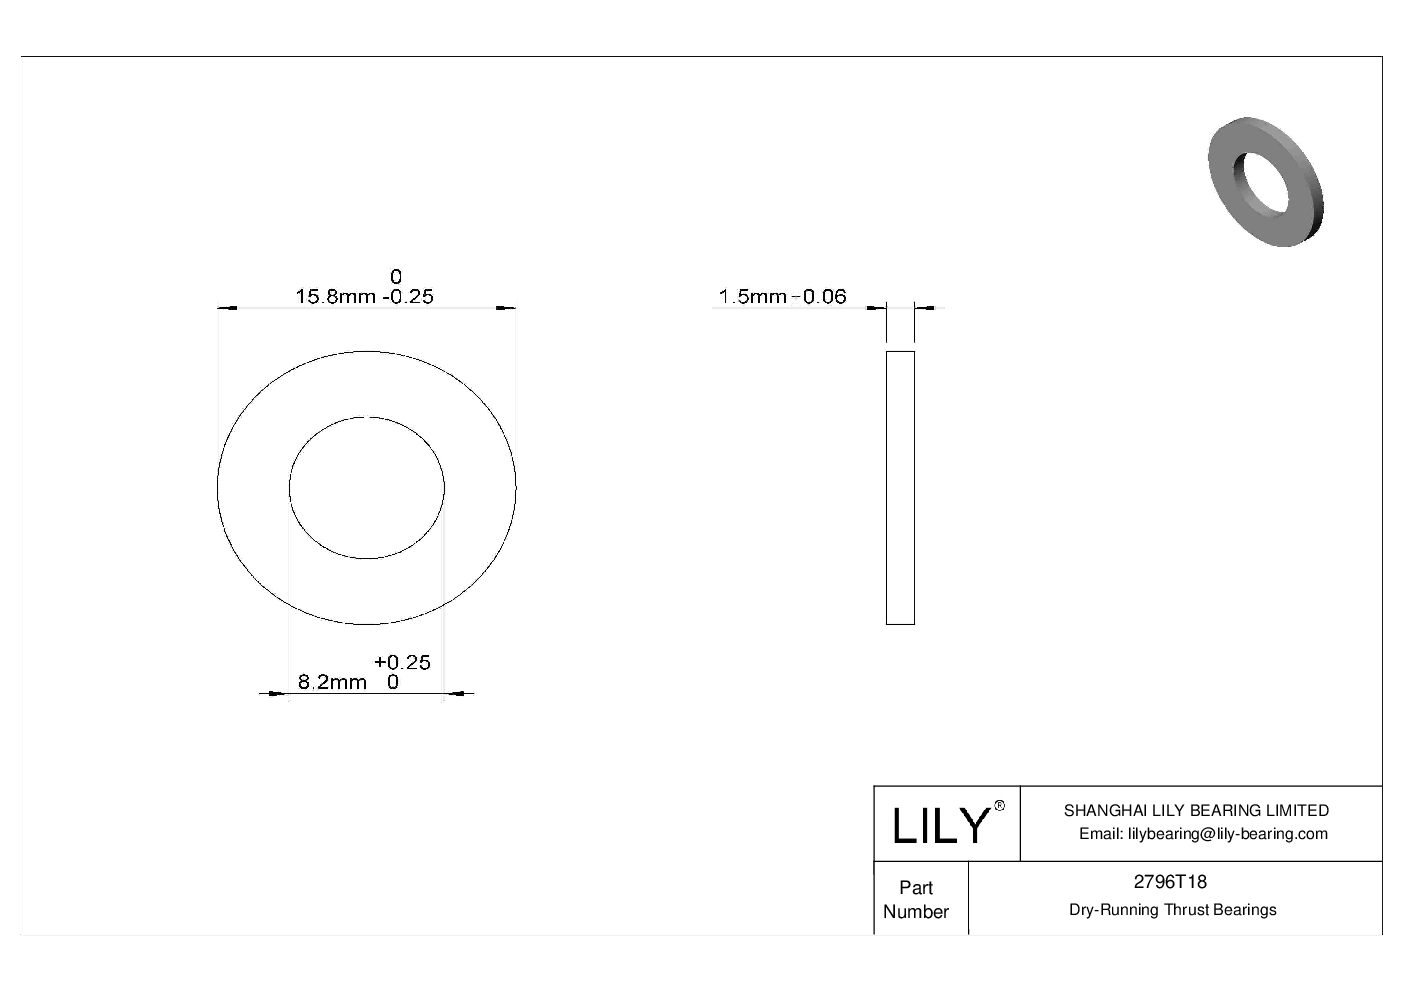 CHJGTBI Ultra-Low-Friction Dry-Running Thrust Bearings cad drawing